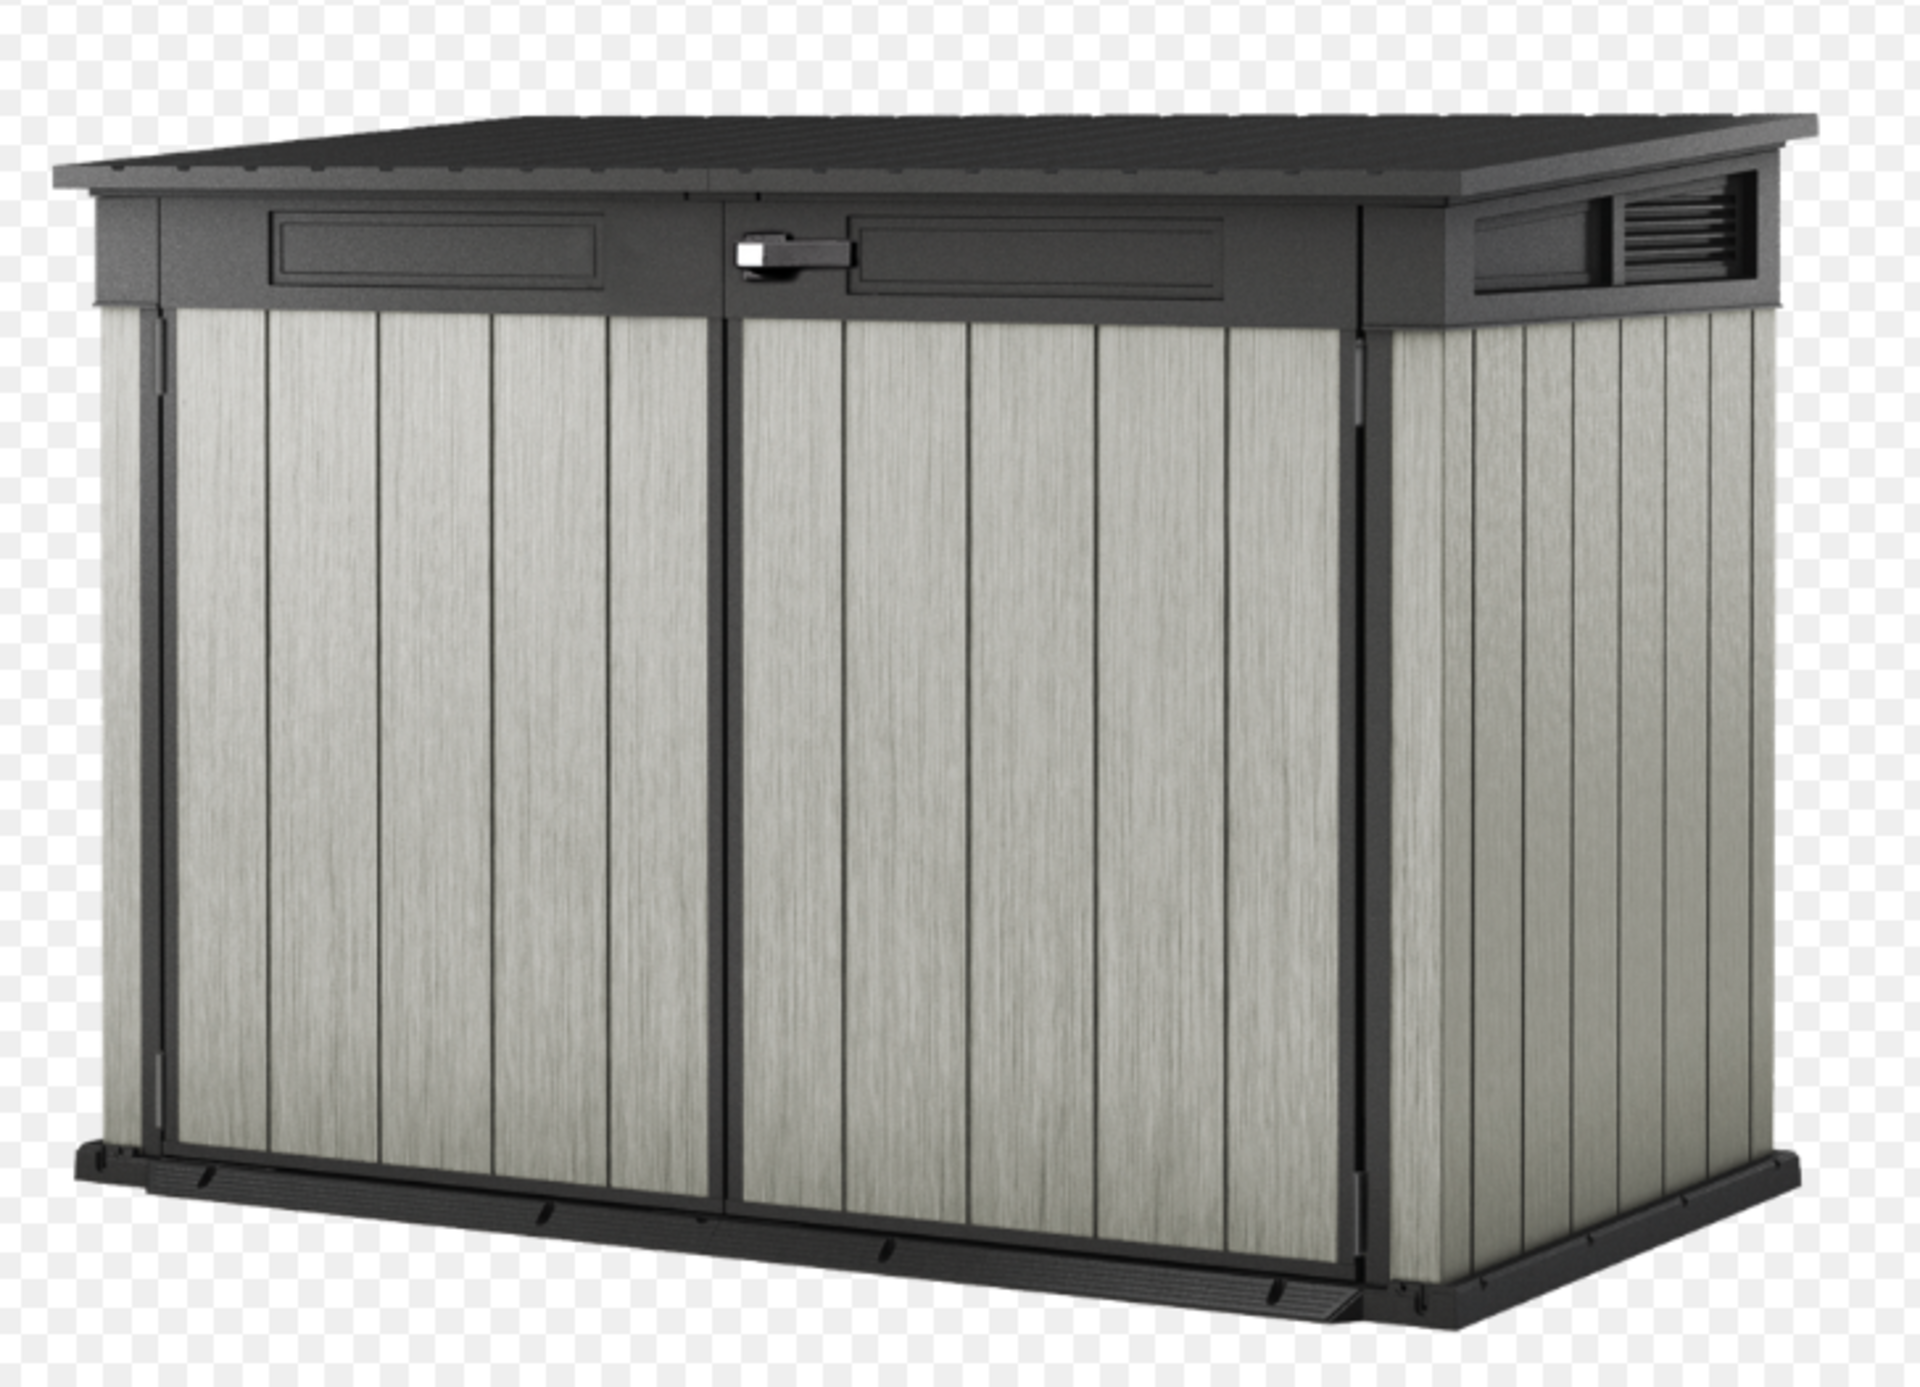 The Grande Store Horizontal Storage Shed